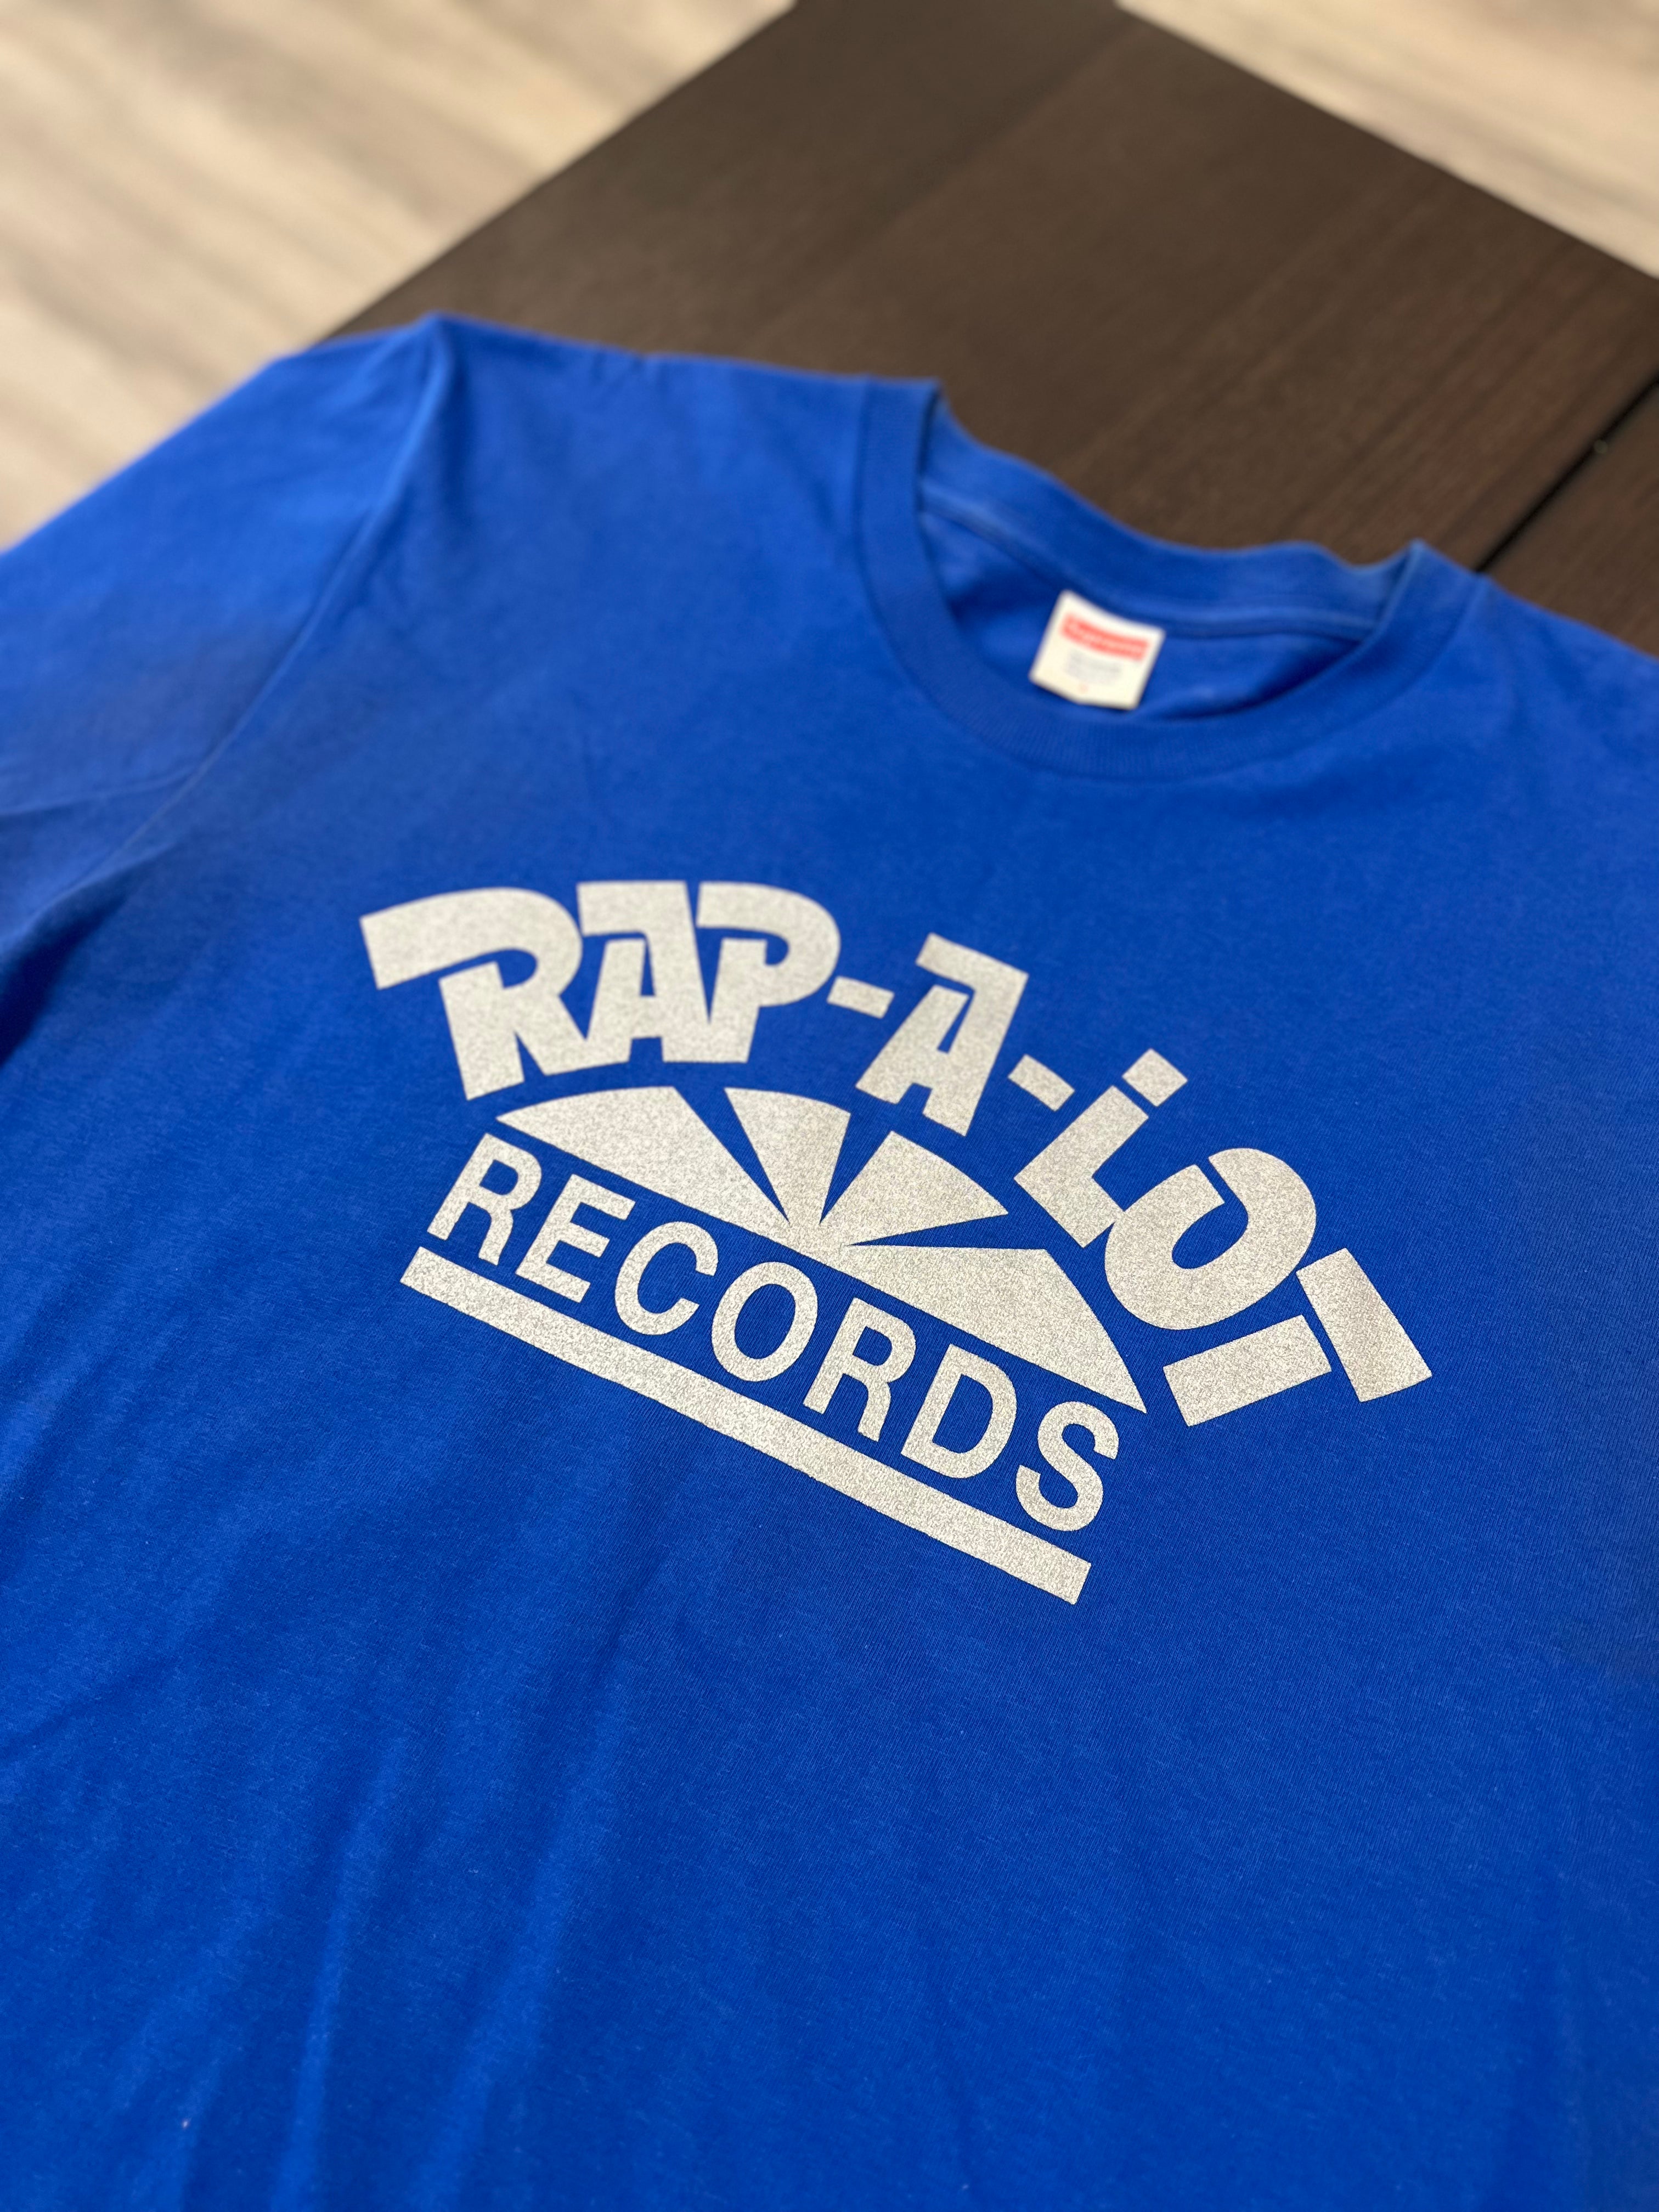 Rap-A-Lot Records Supreme Tee (Used)